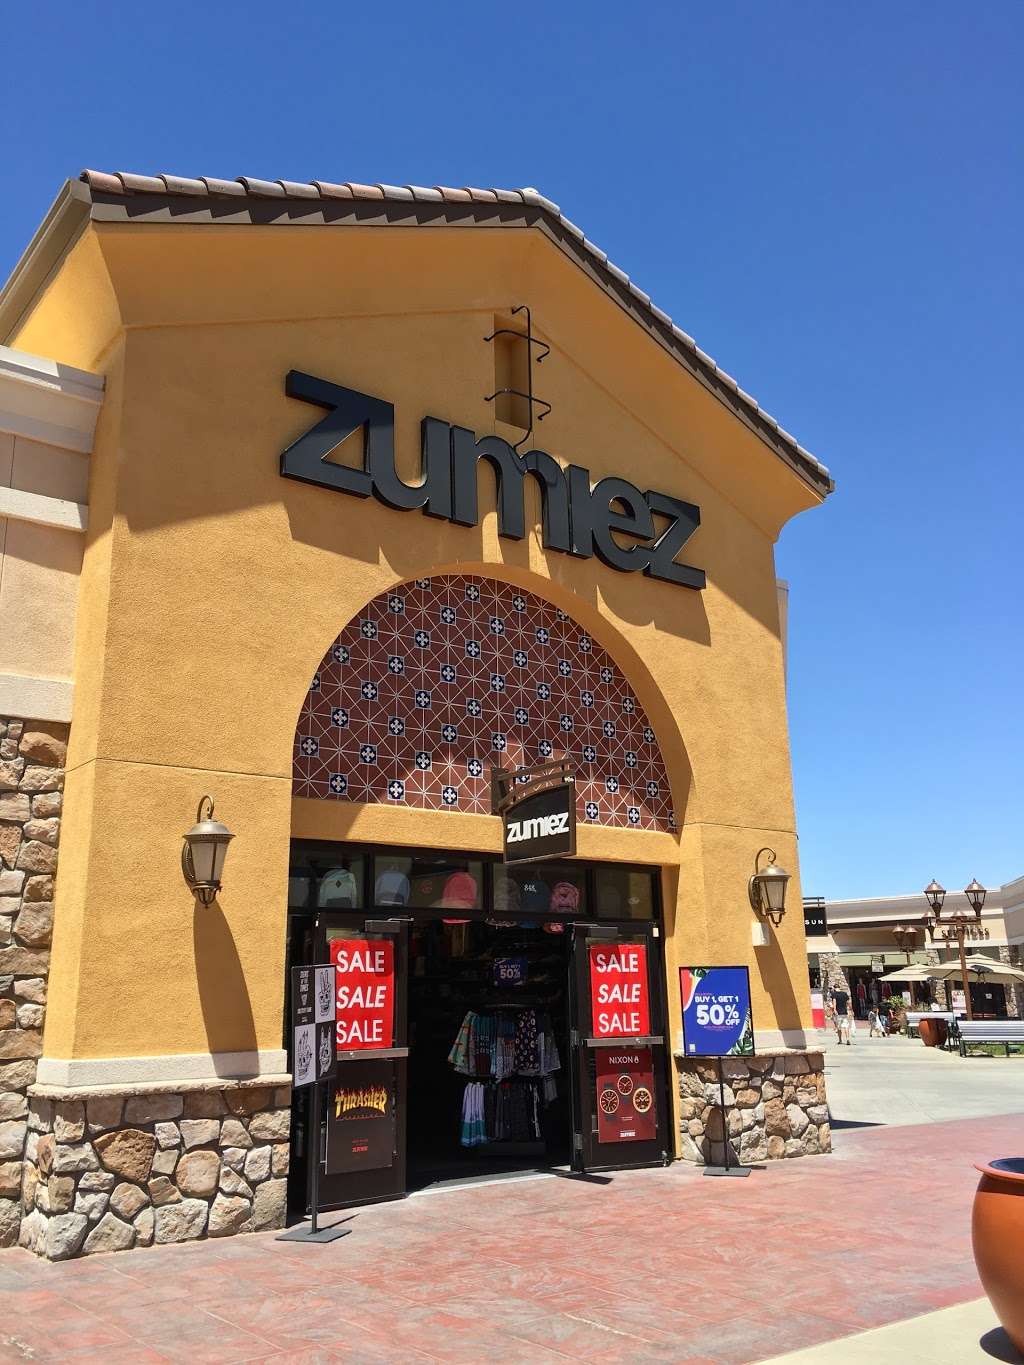 Zumiez | 5701 Outlets at Tejon Pkwy, Arvin, CA 93203 | Phone: (661) 858-2189